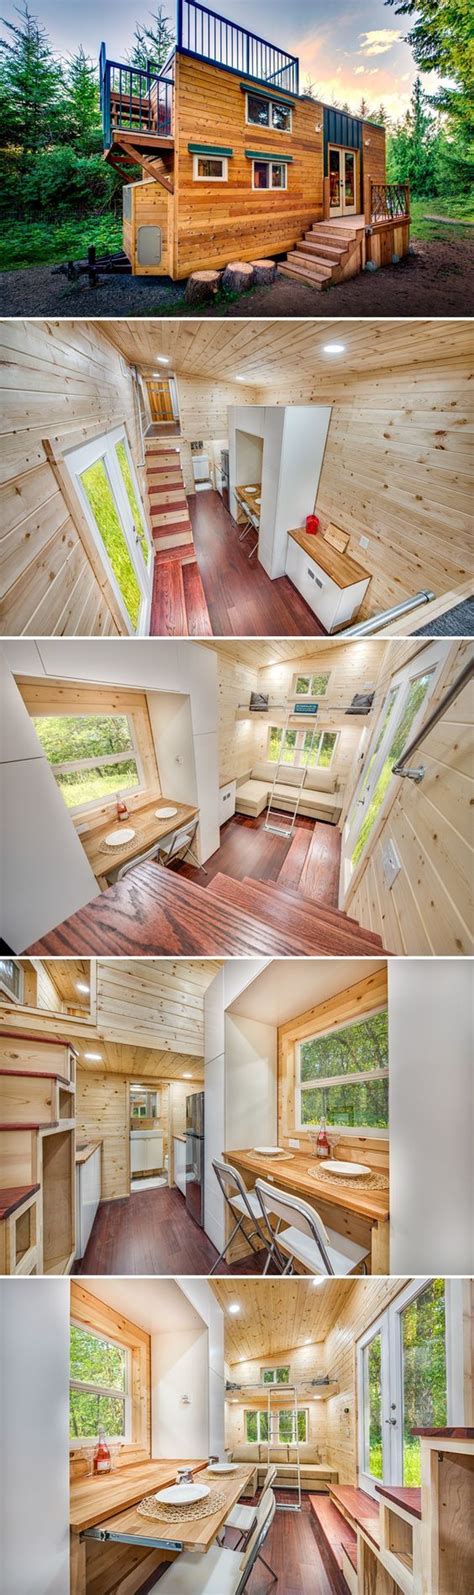 Basecamp Green By Backcountry Tiny Homes Tiny Living Green Roof